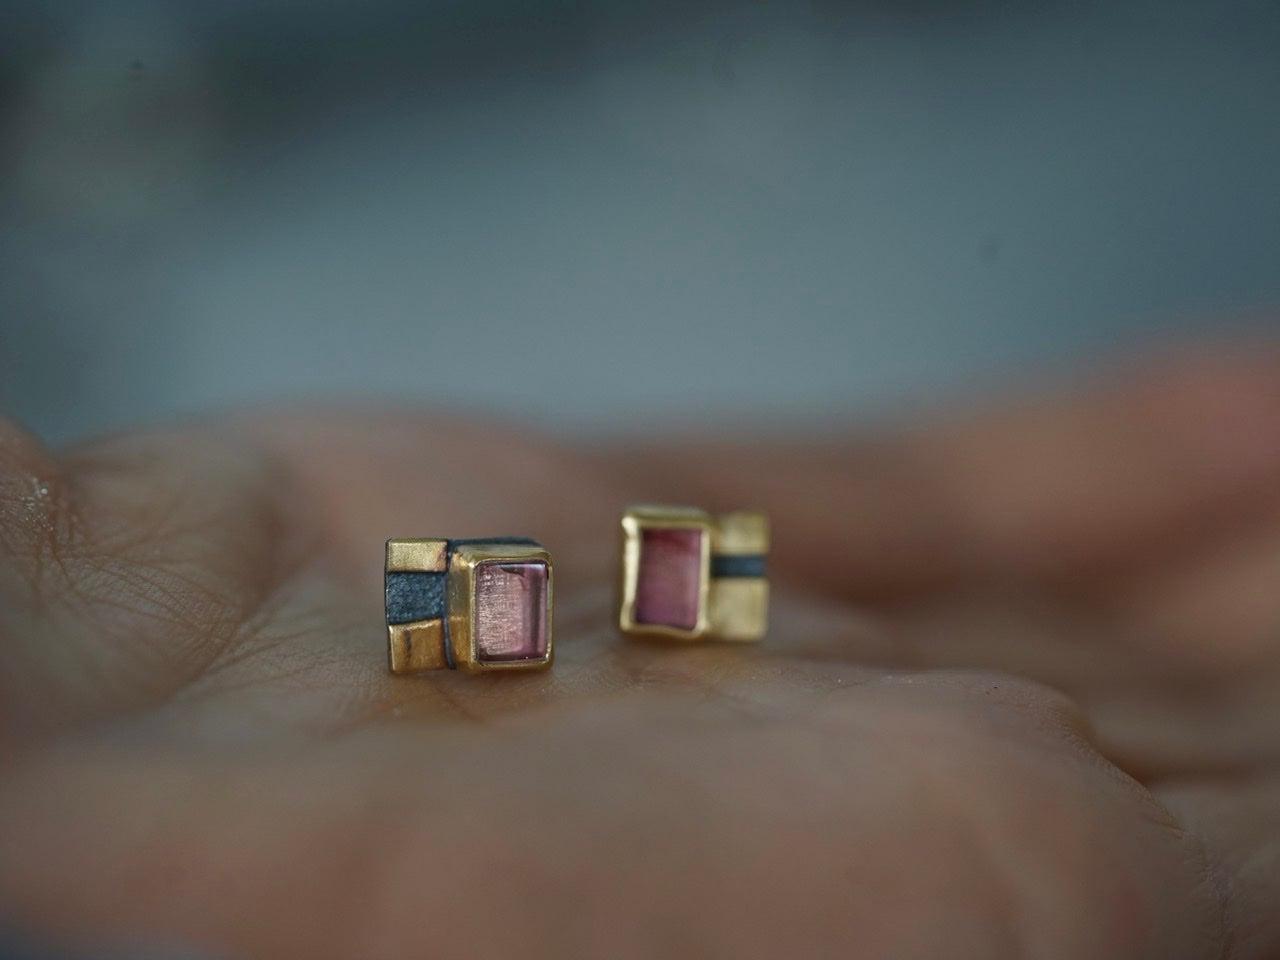 Rose colored tourmaline and 22k gold post earrings